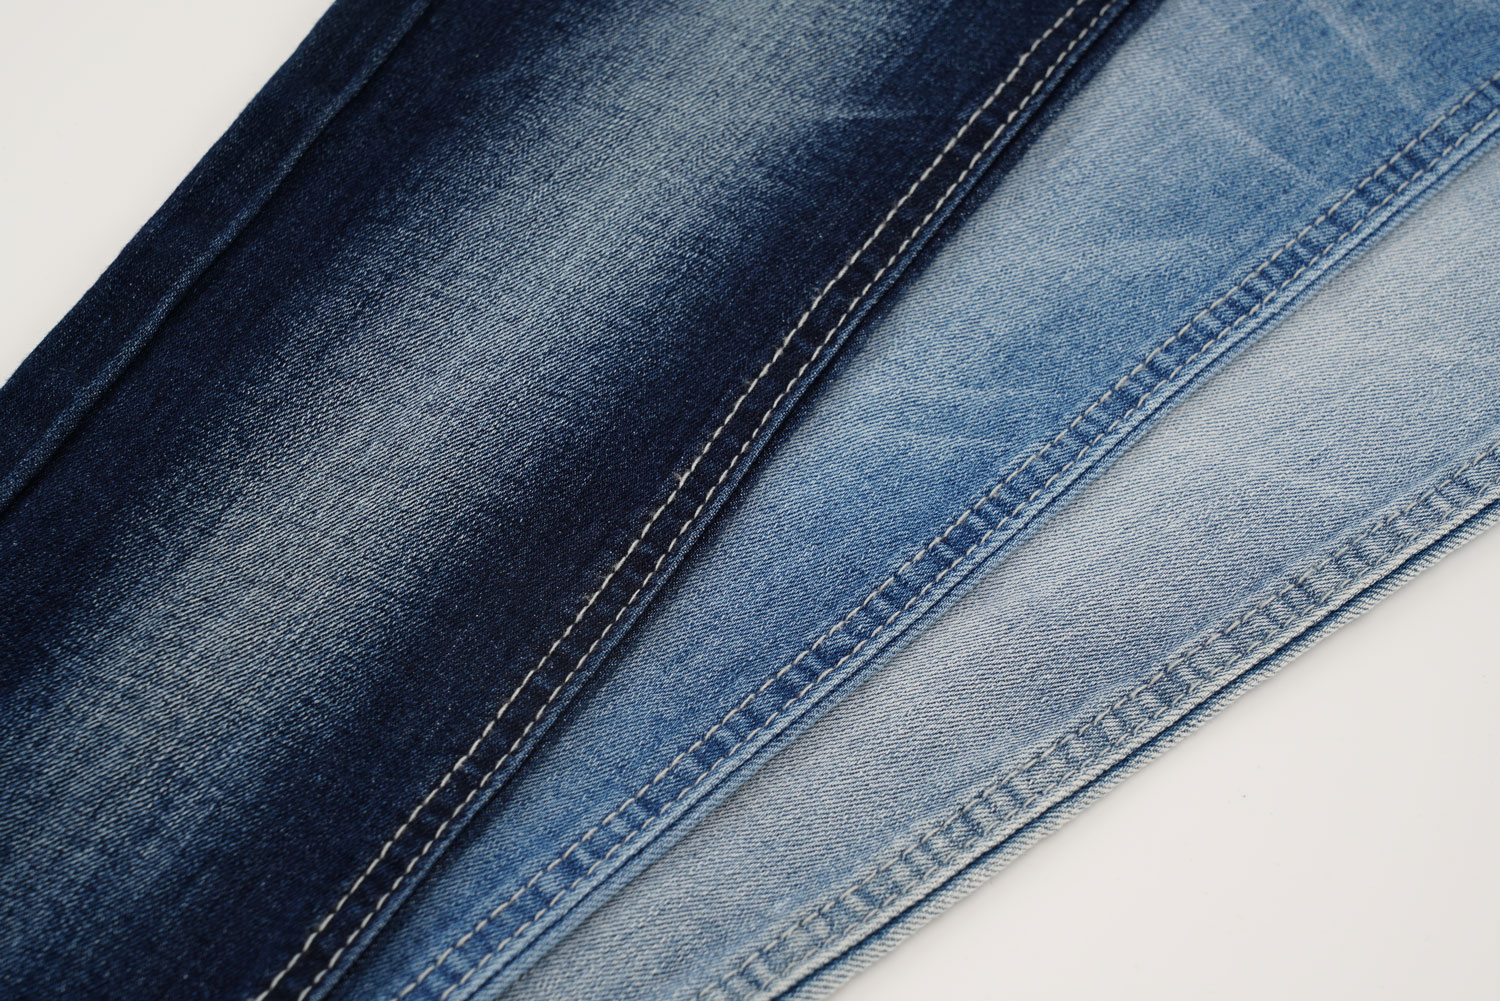 Best 5 Tips to Choose a Cotton Spendex Denim Fabric 2